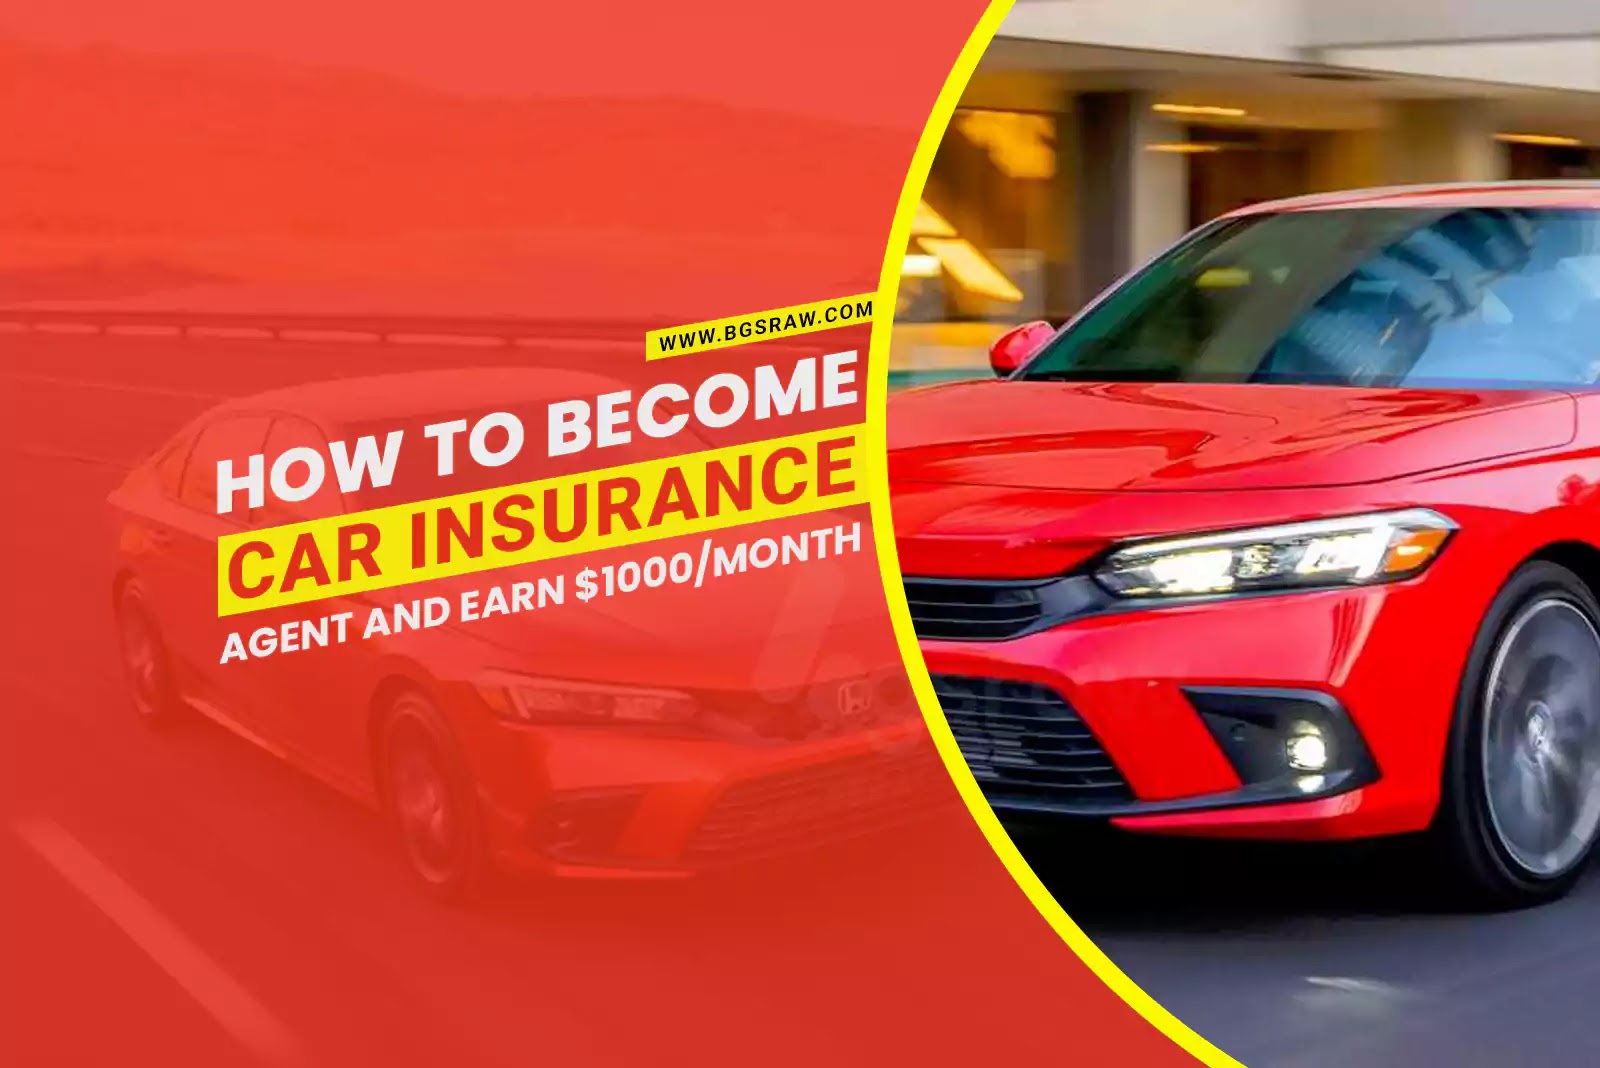 How to Become Car Insurance Agent in California, Earn 1000 USD per month